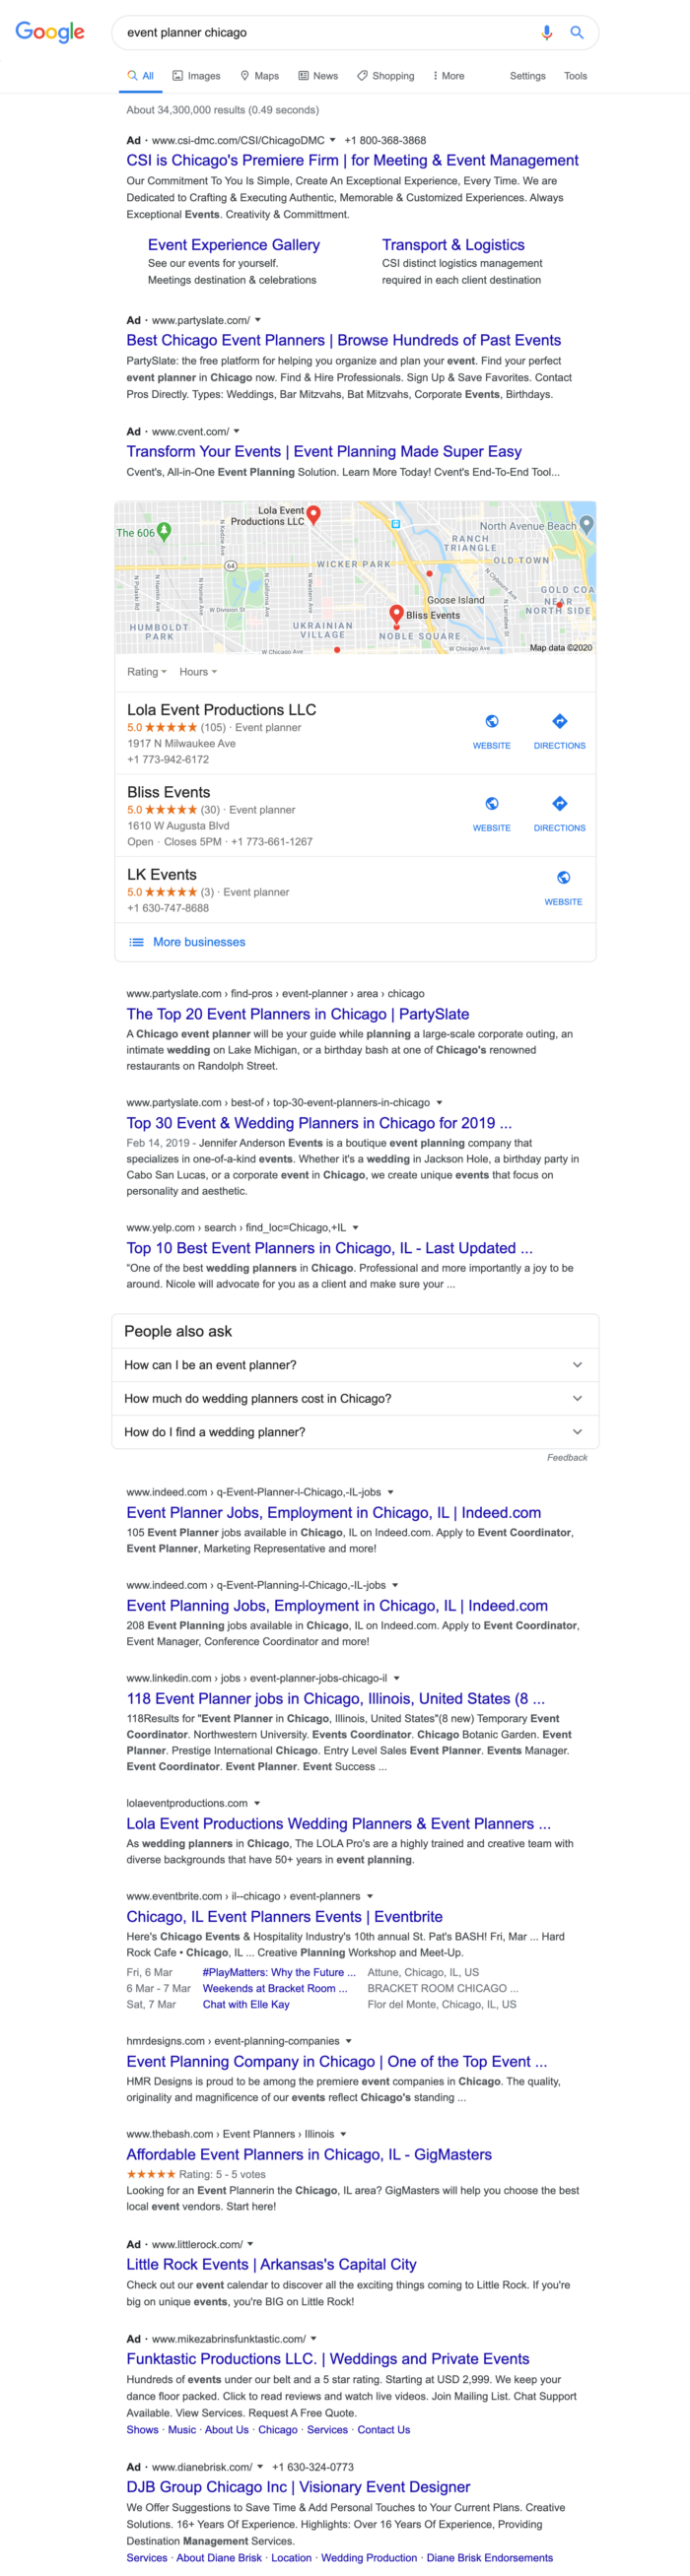 Event planner Google search results